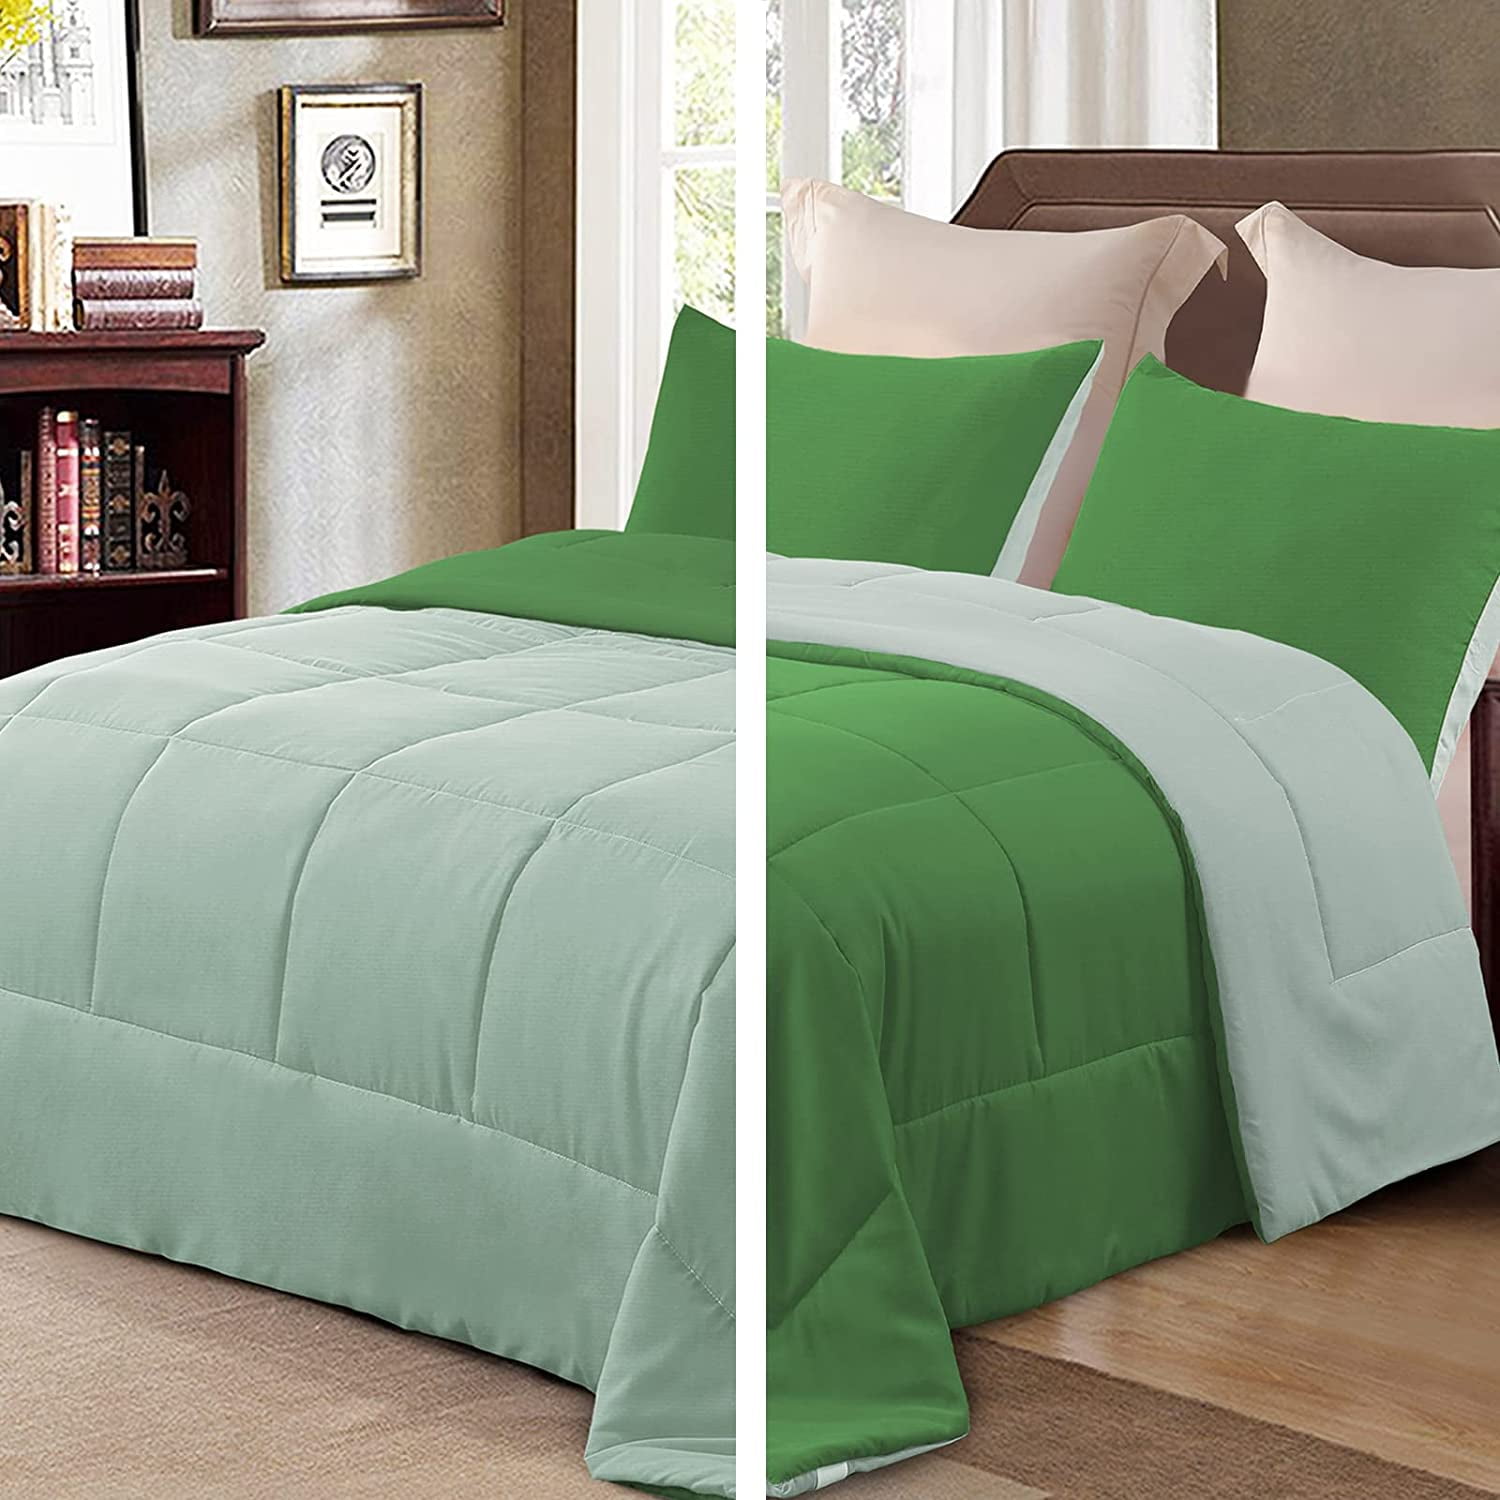 All Seaso Details about   Full 3-Piece Lightweight Reversible Comforter Set 1800 Thread Count 